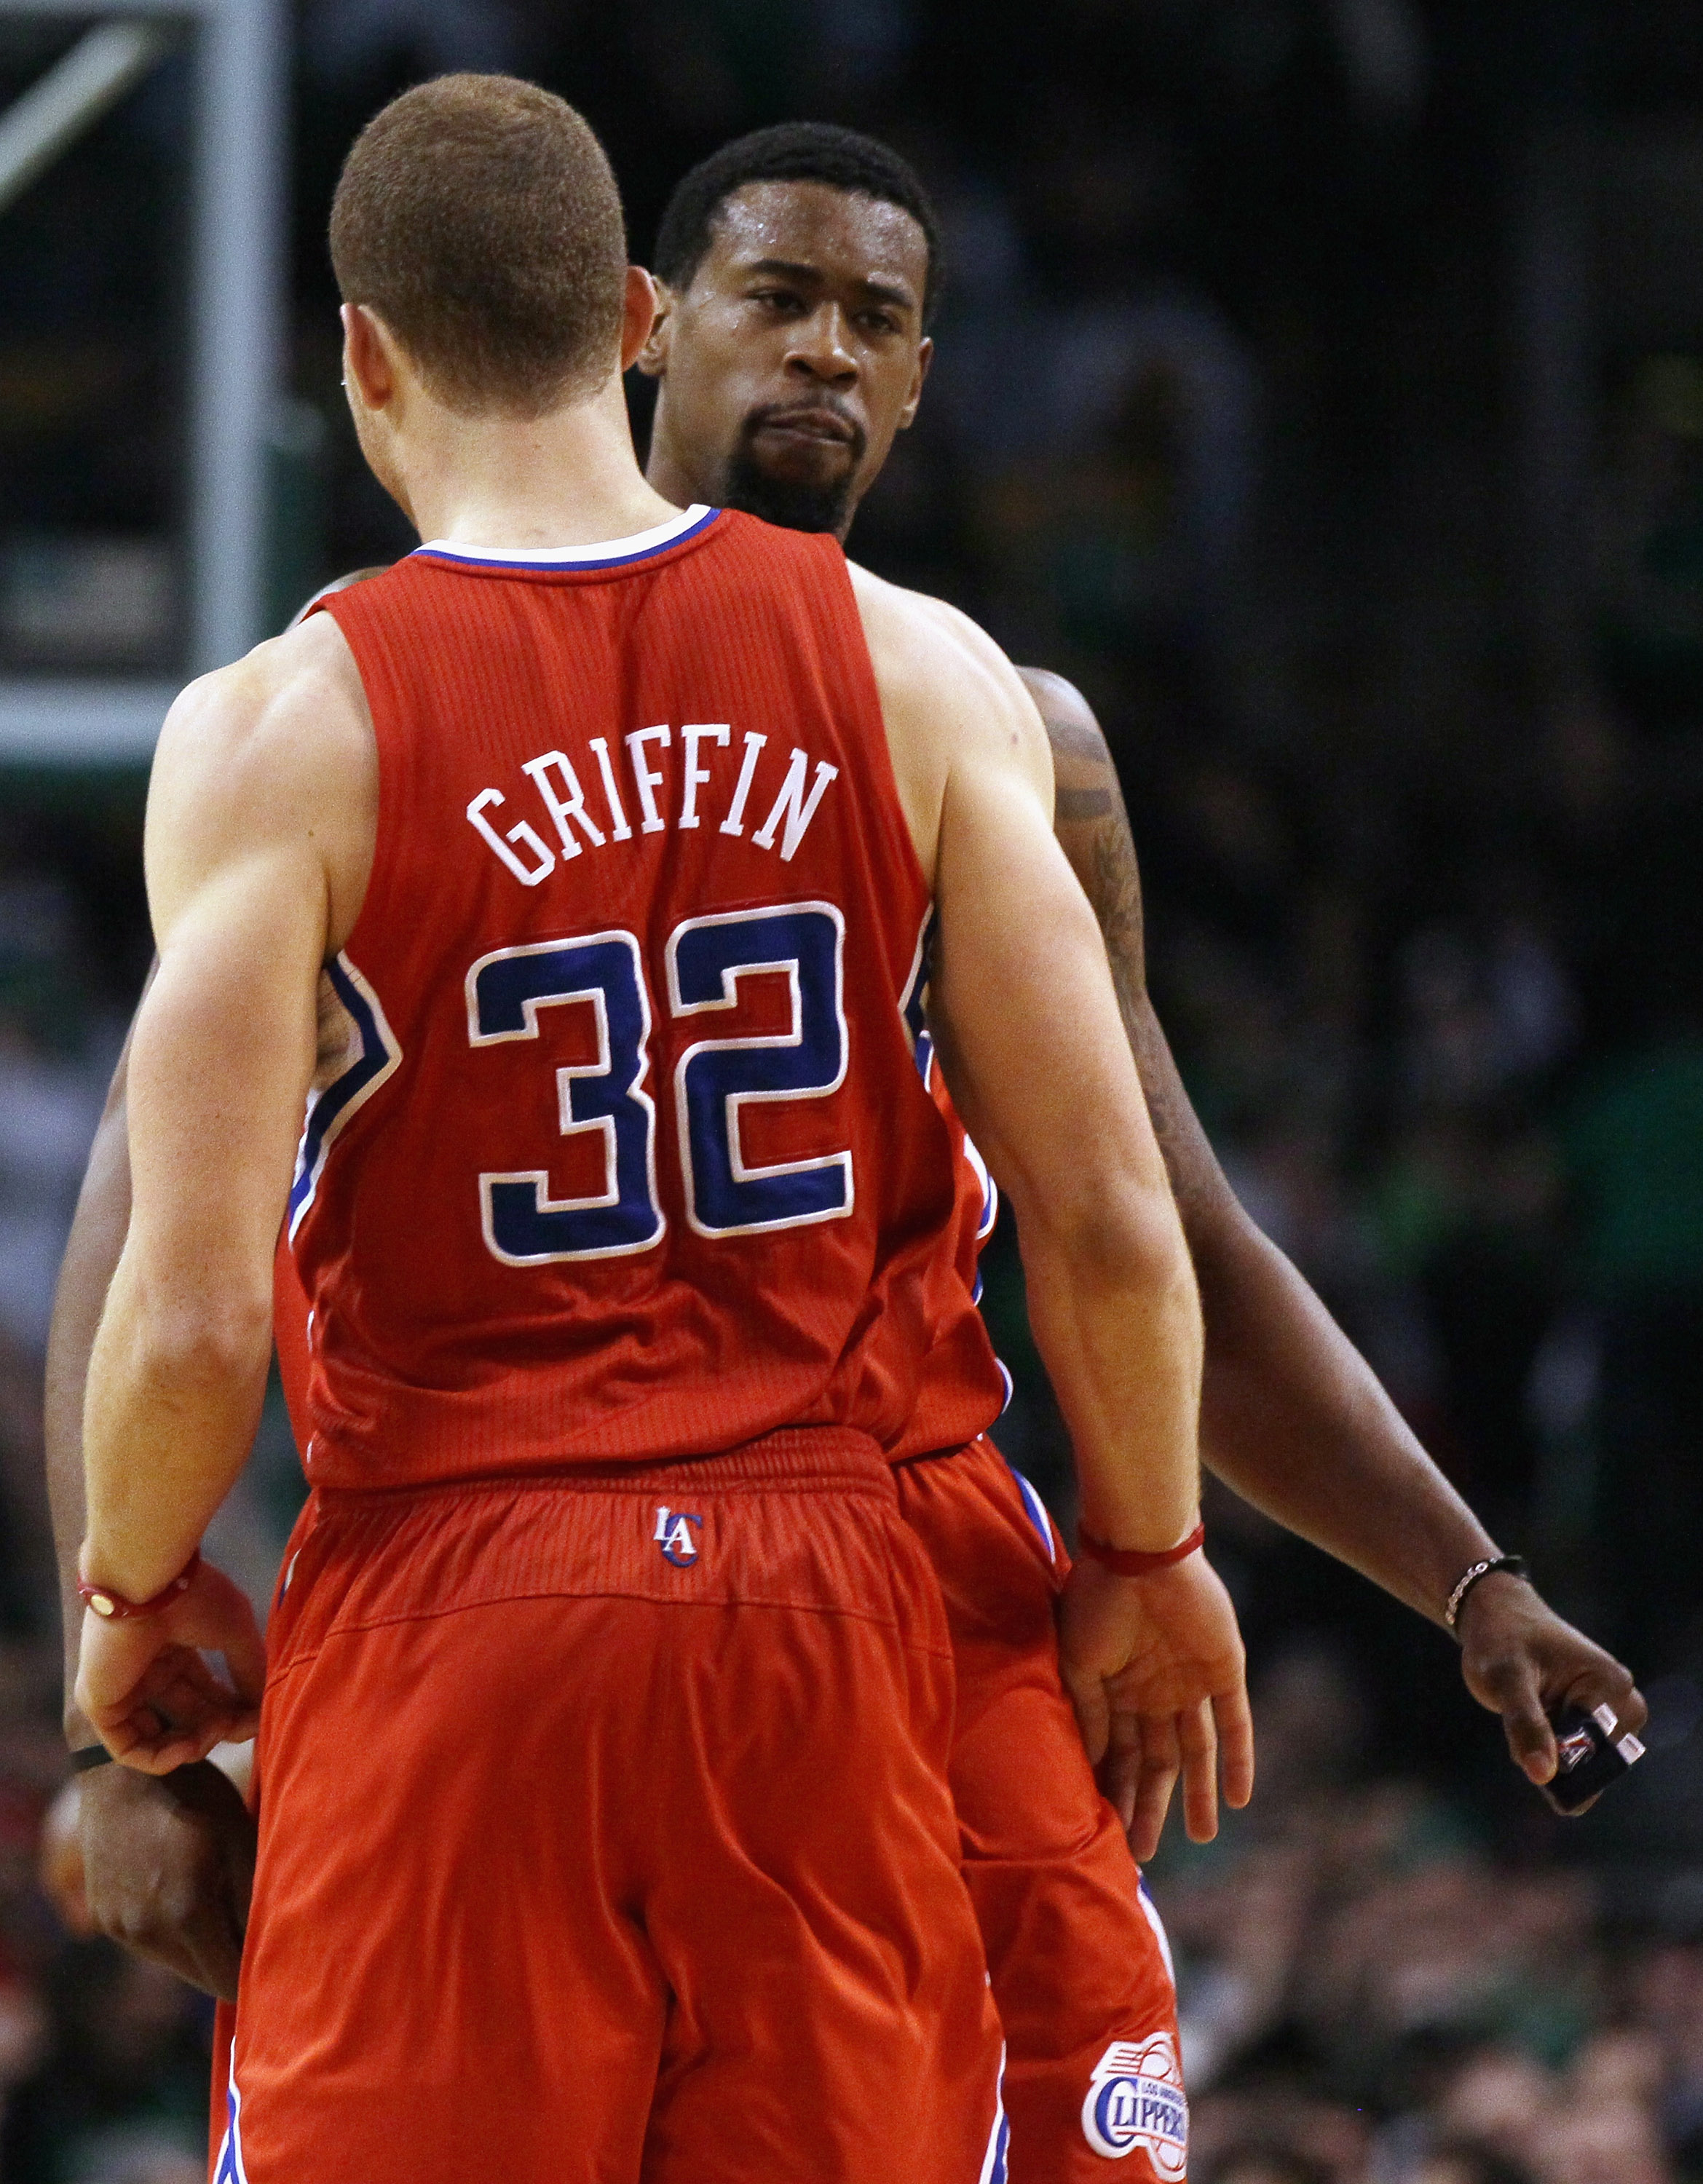 BOSTON, MA - MARCH 09:  DeAndre Jordan #9 and Blake Griffin #32 of the Los Angeles Clippers celebrate in the fourth quarter against the Boston Celtics on March 9, 2011 at the TD Garden in Boston, Massachusetts. The Los Angeles Clippers defeated the Boston